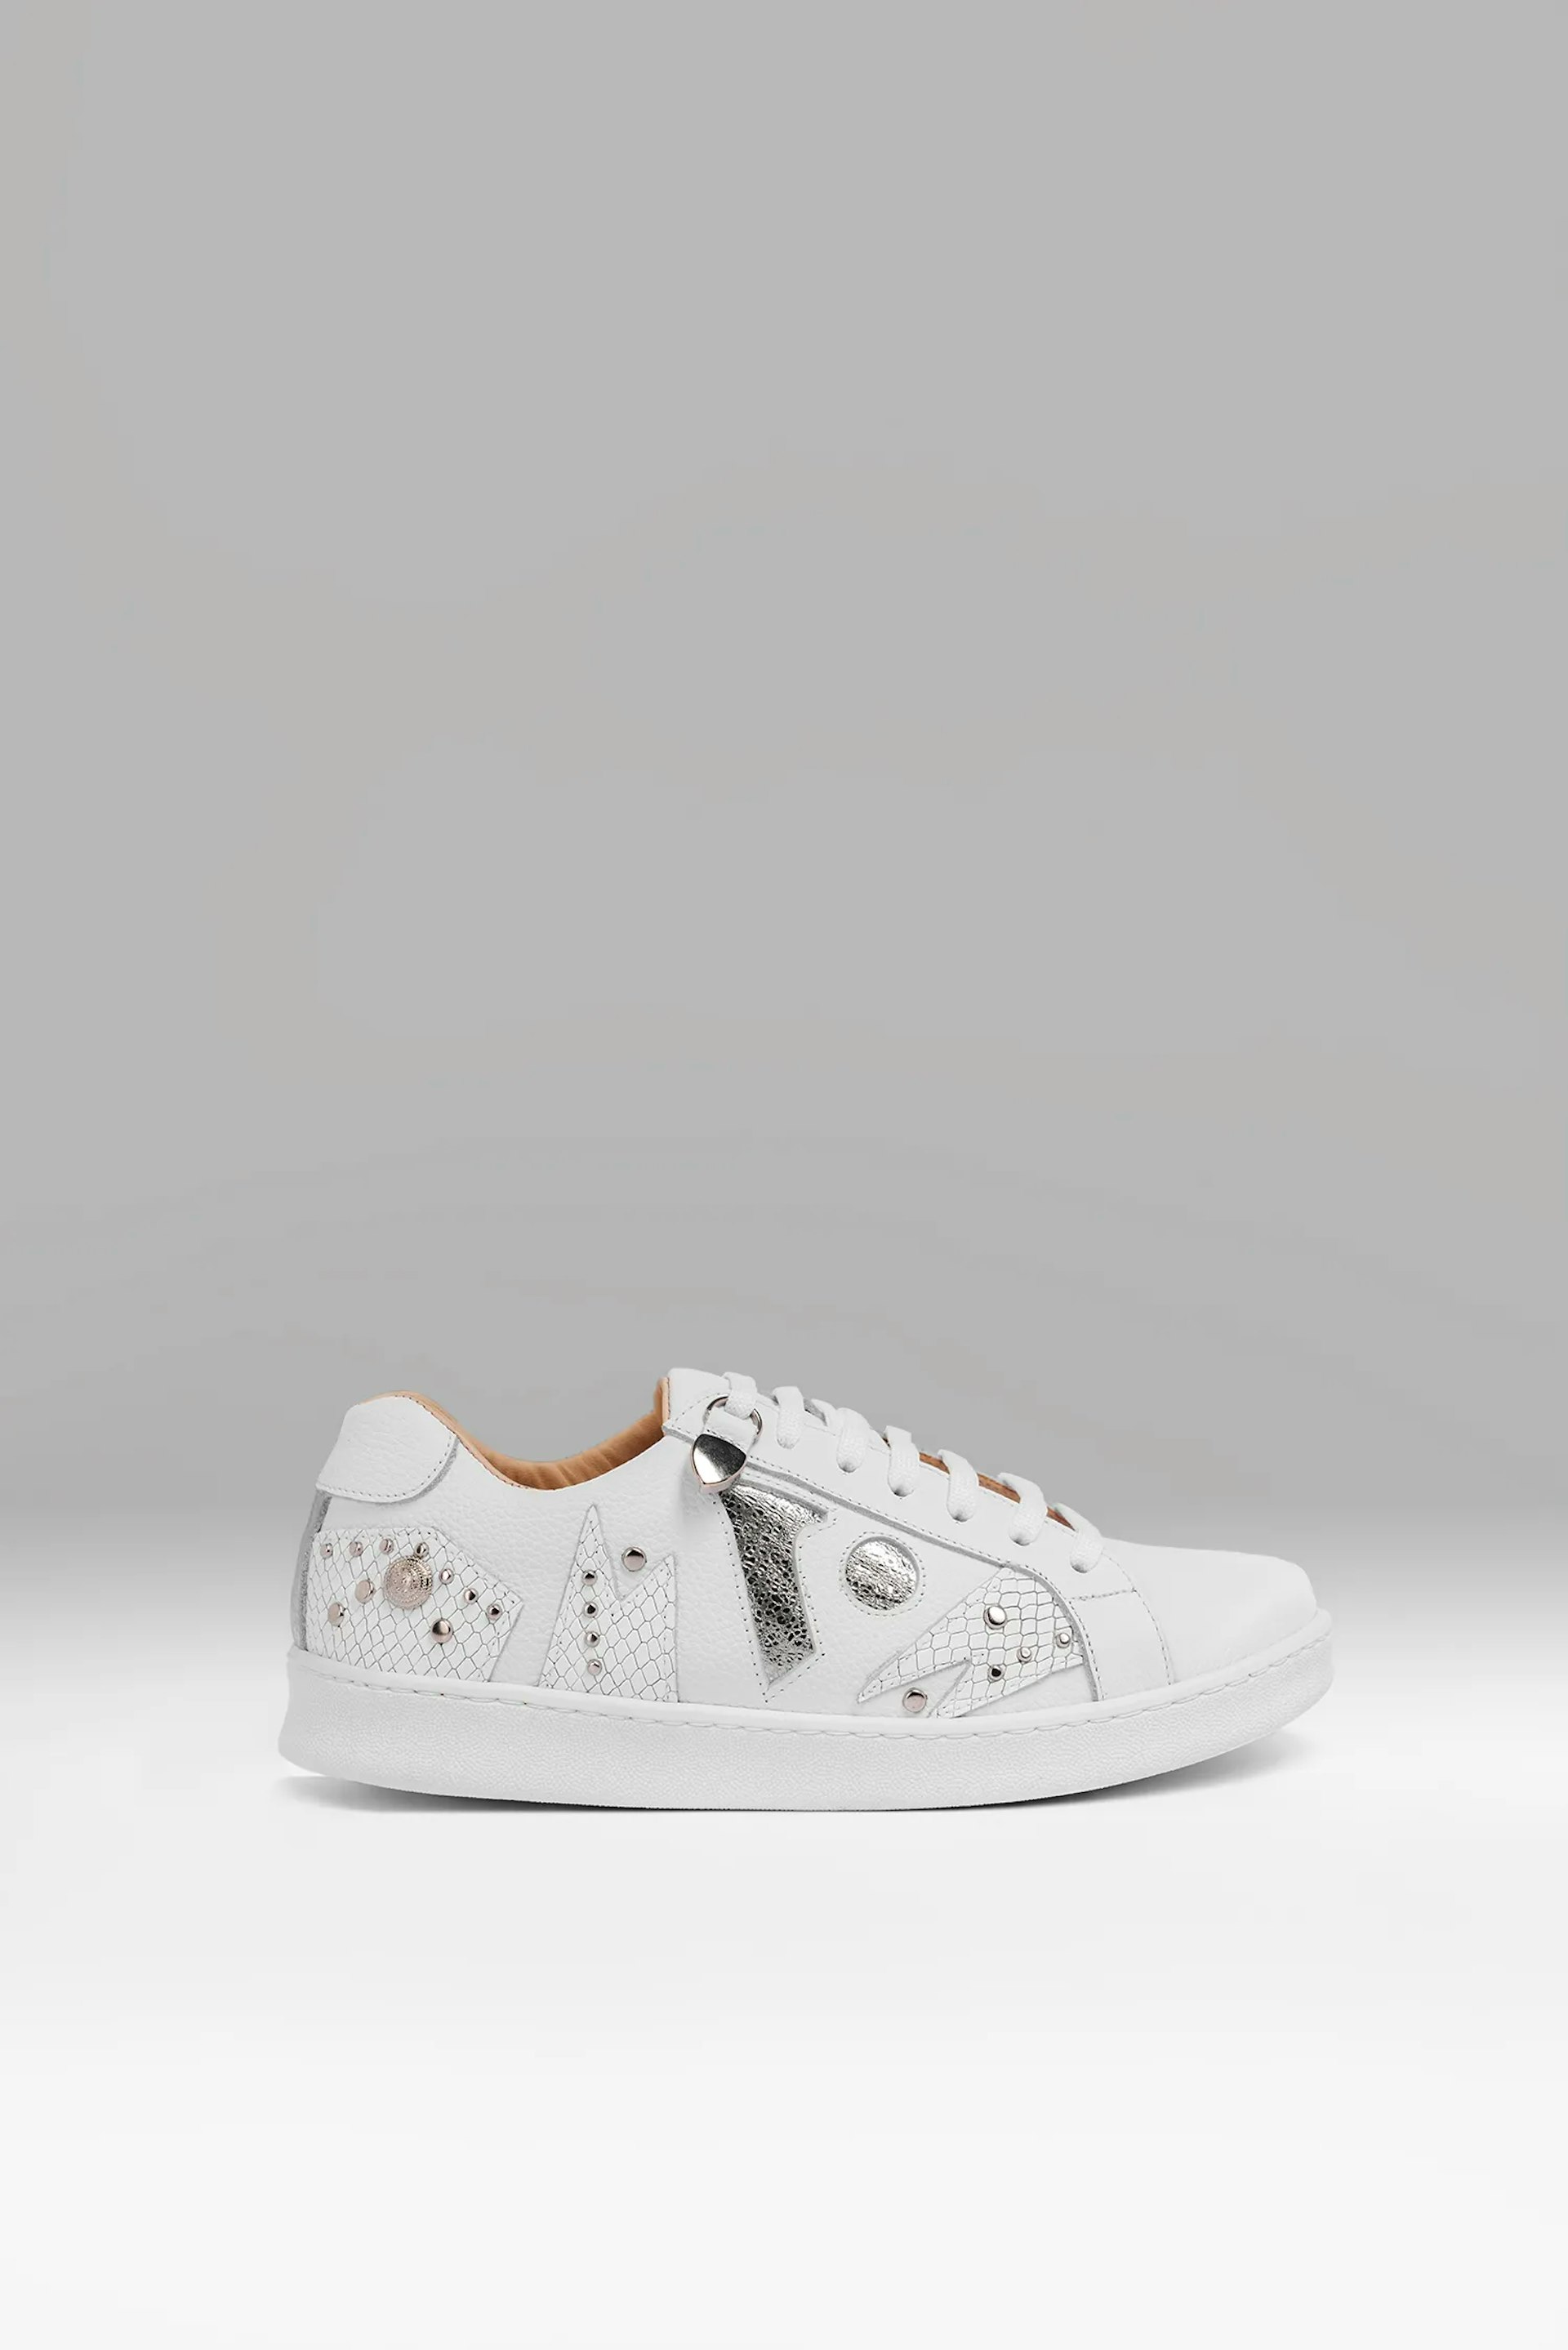 Sneakers Vitti Ibiza. White sneaker with tone-on-tone textured cutouts, silver studs, and the brand's logo in shiny silverWhite sneaker with tone-on-tone textured cutouts, silver studs, and the brand's logo in shiny silver...